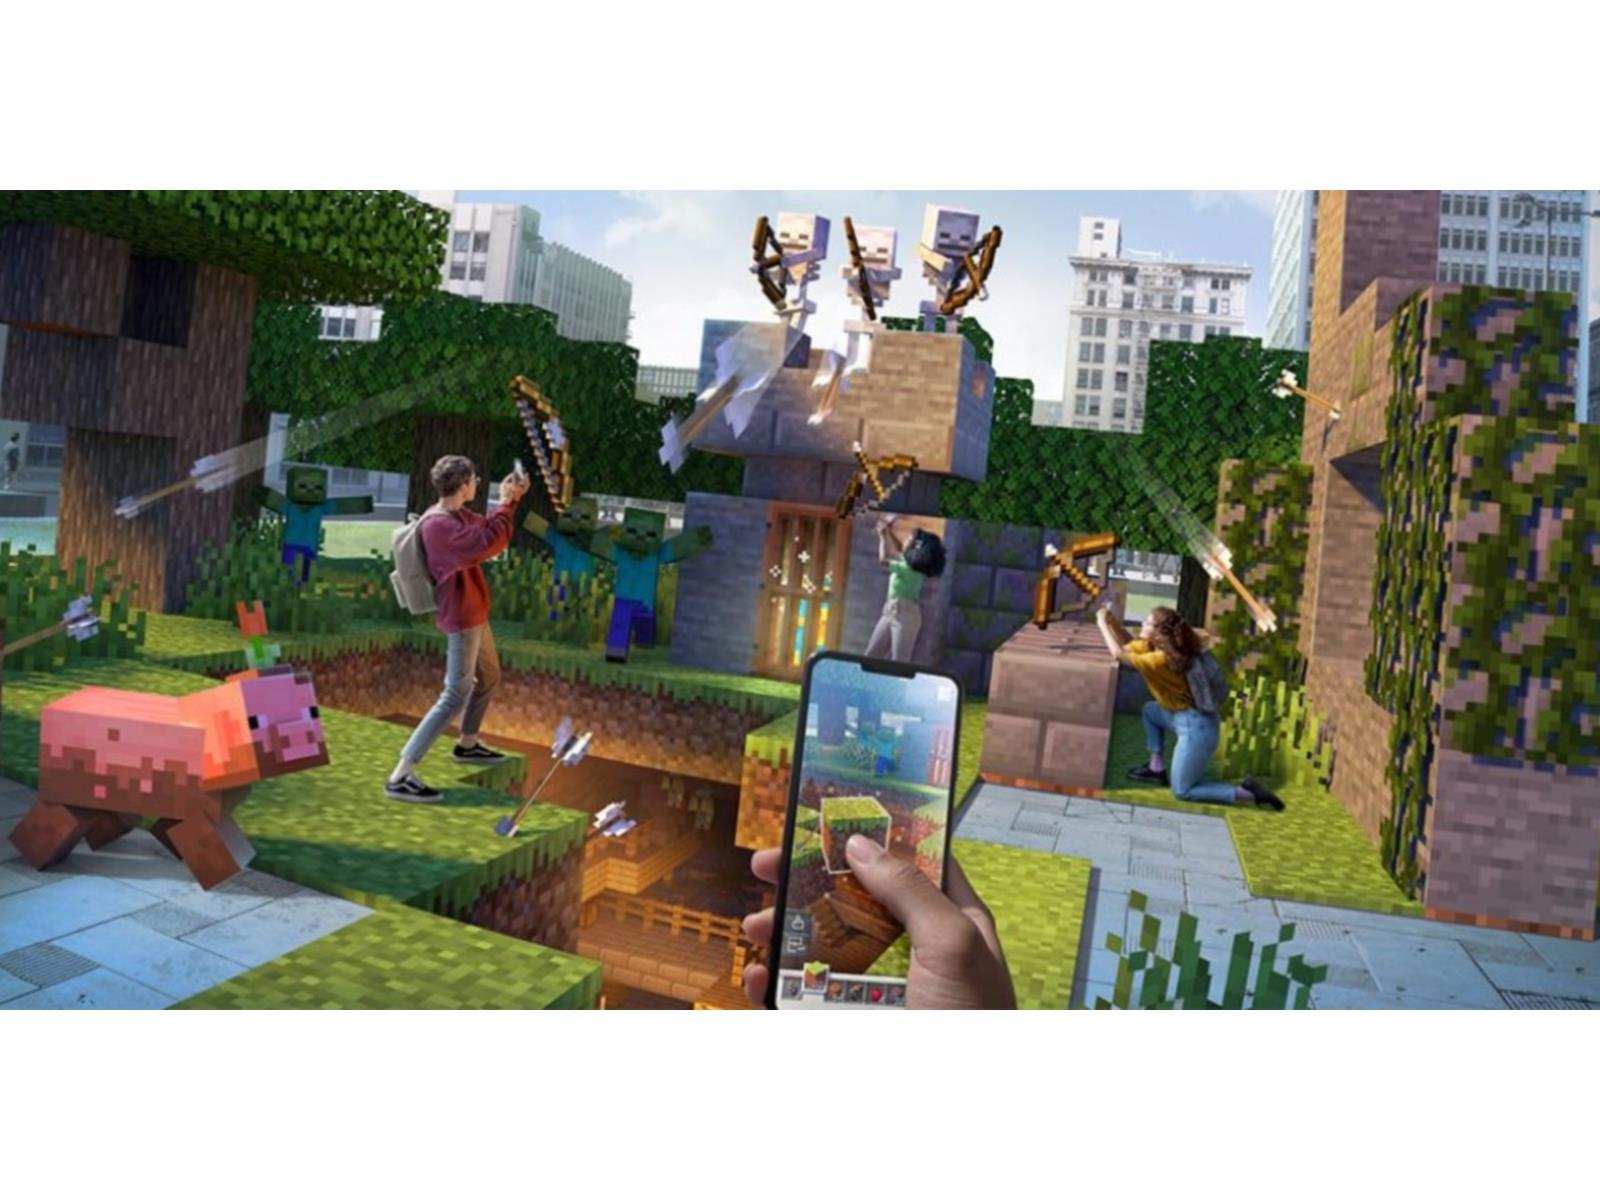 Minecraft Earth To Be Shut Down on June 30, Final Build Released